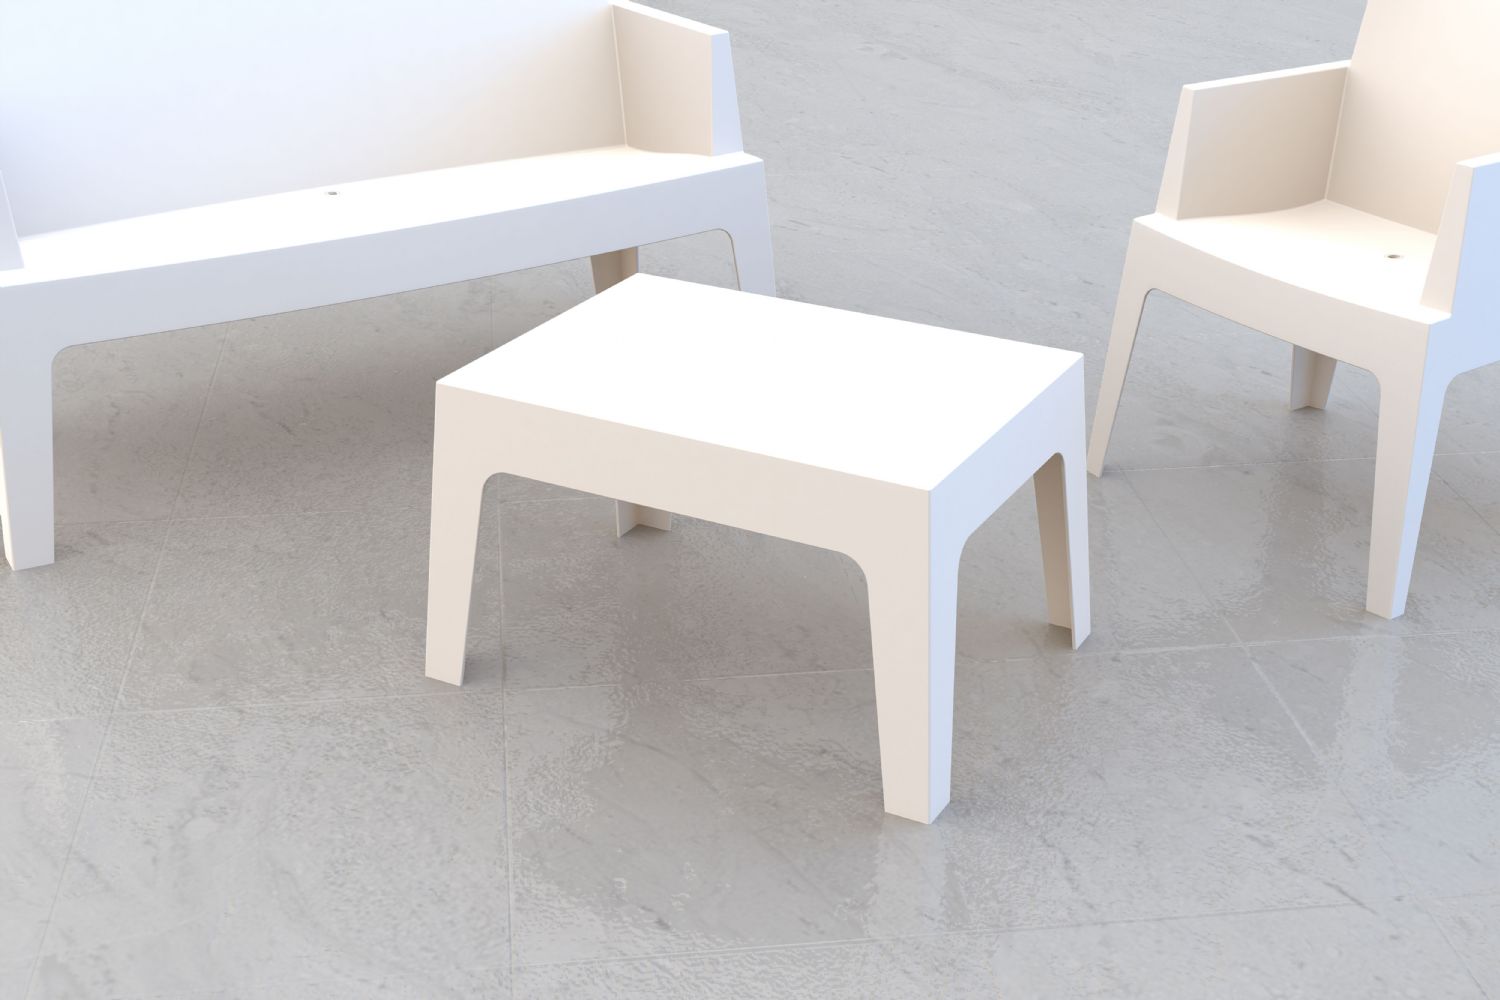 Box Resin Outdoor Coffee Table White ISP064-WHI - 4